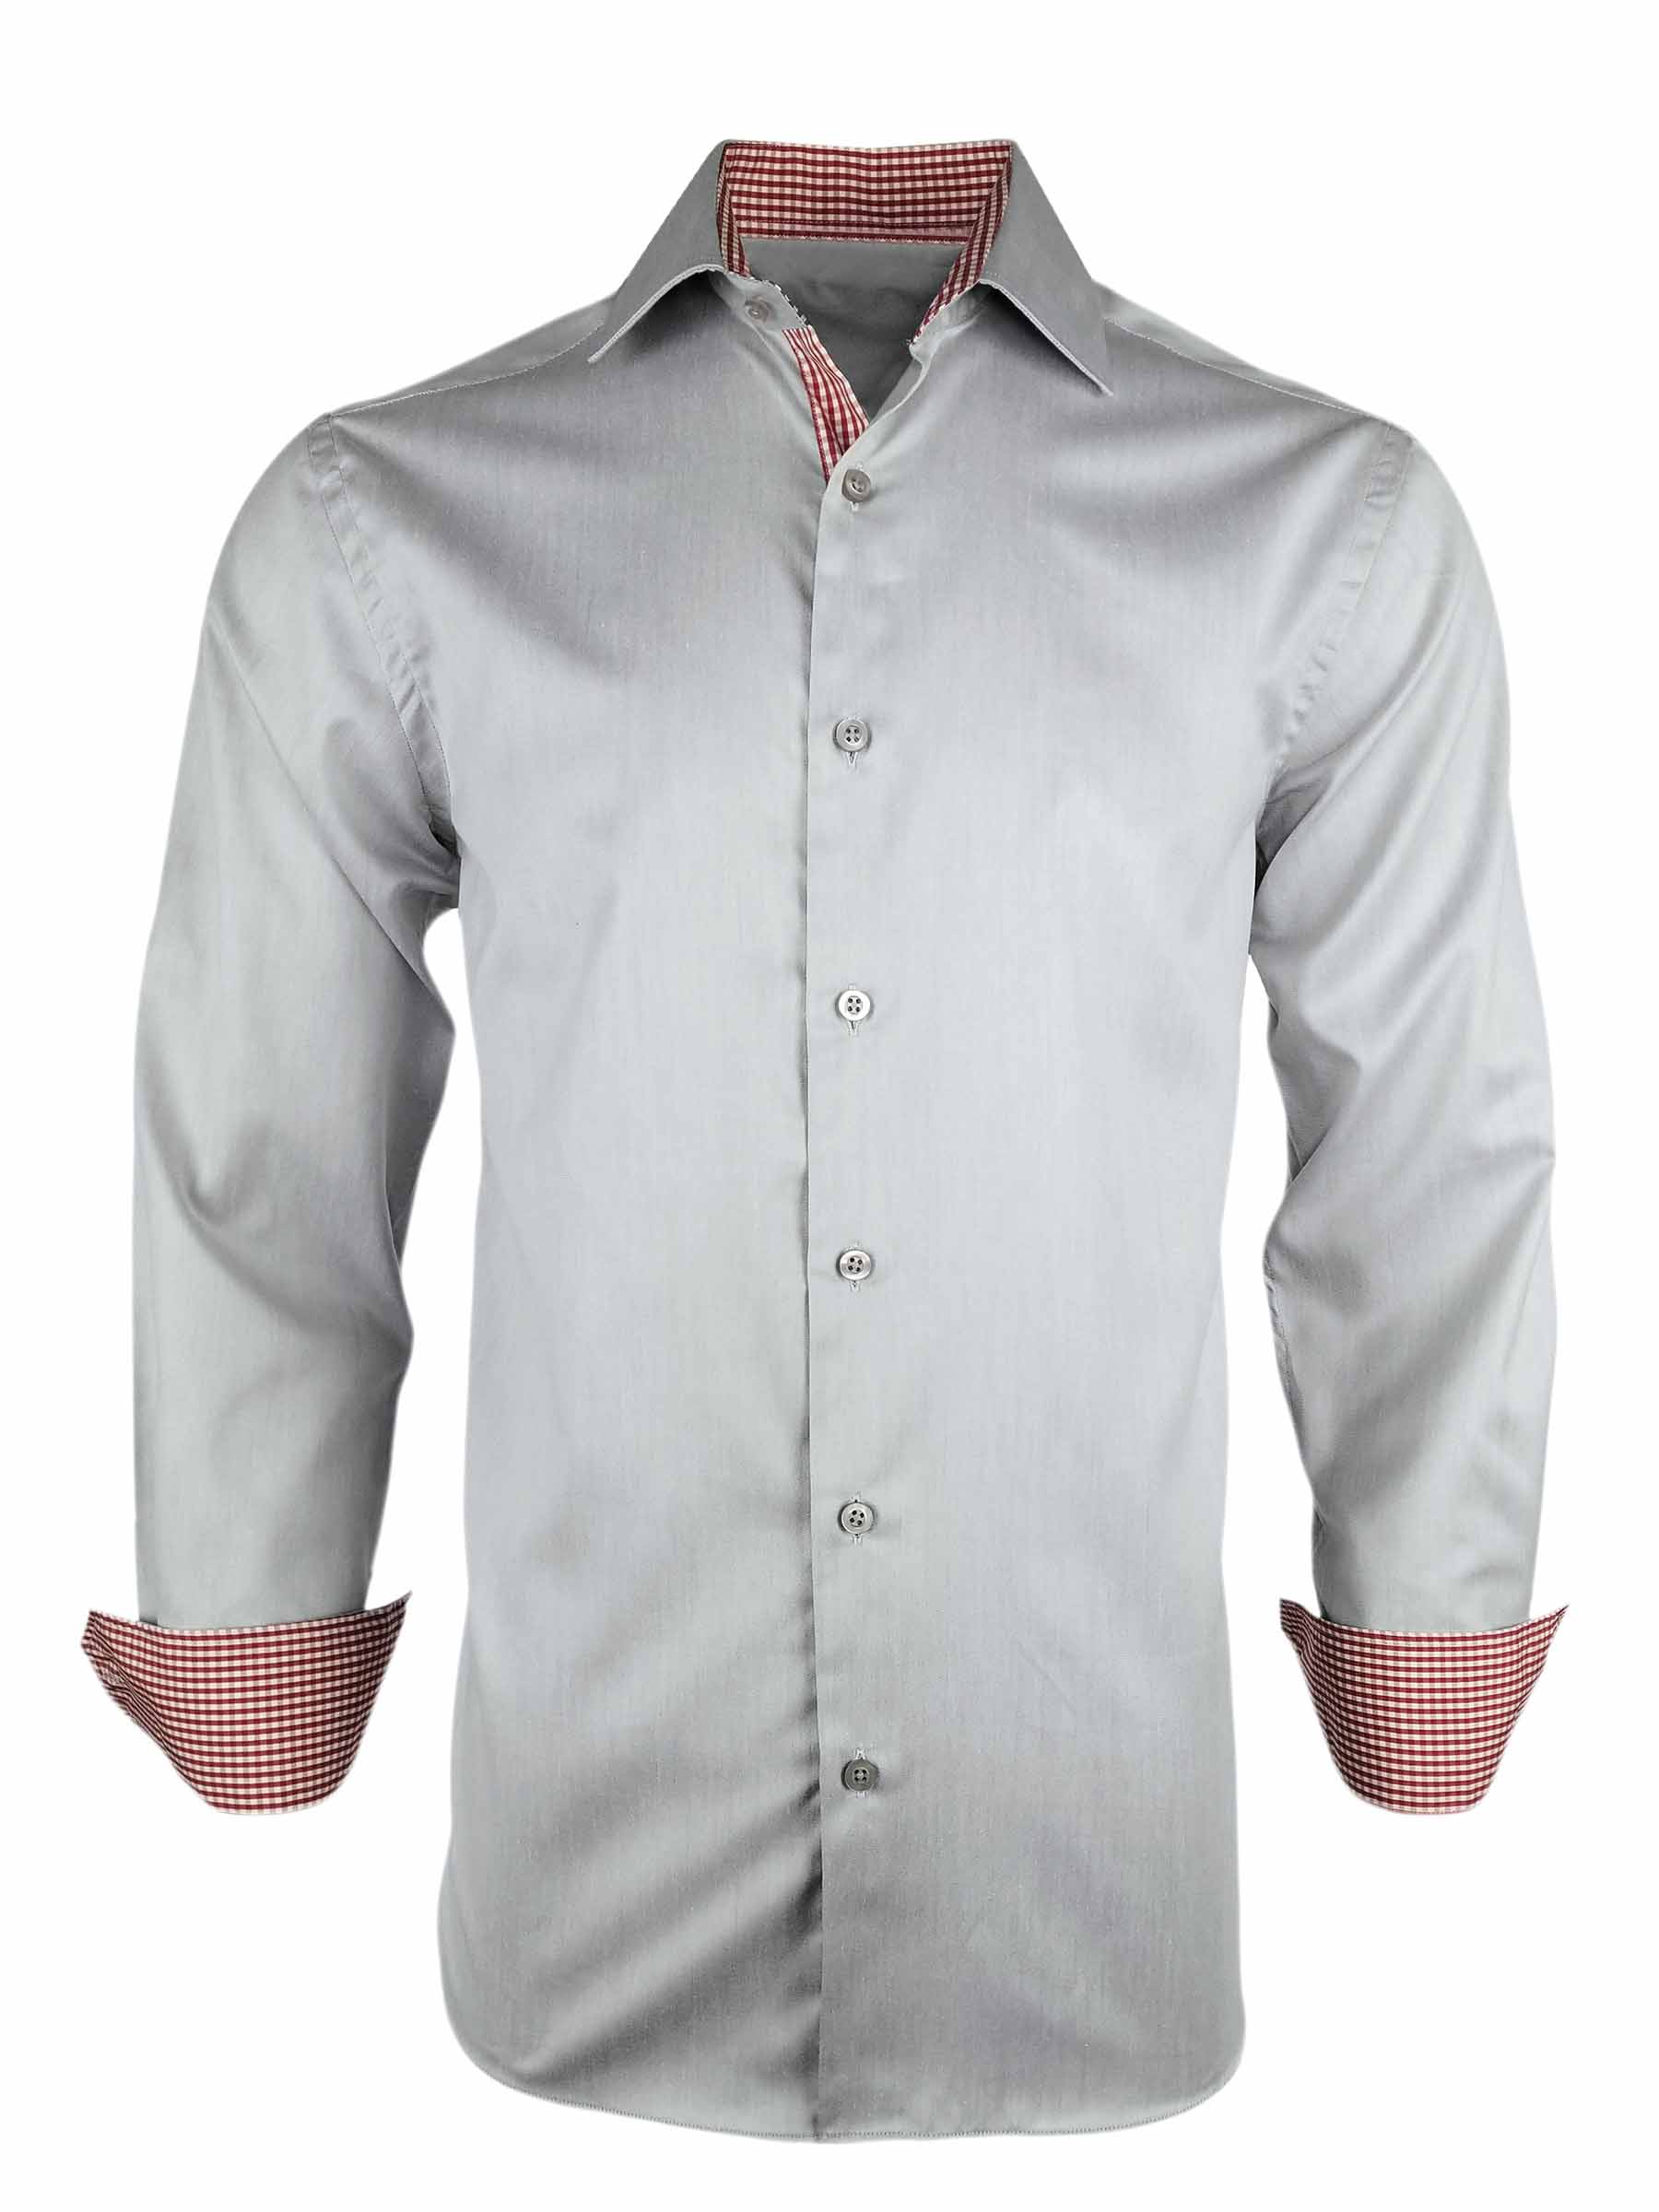 Men's Grey with Red Check Contrast Shirt - Long Sleeve - Uniform Edit